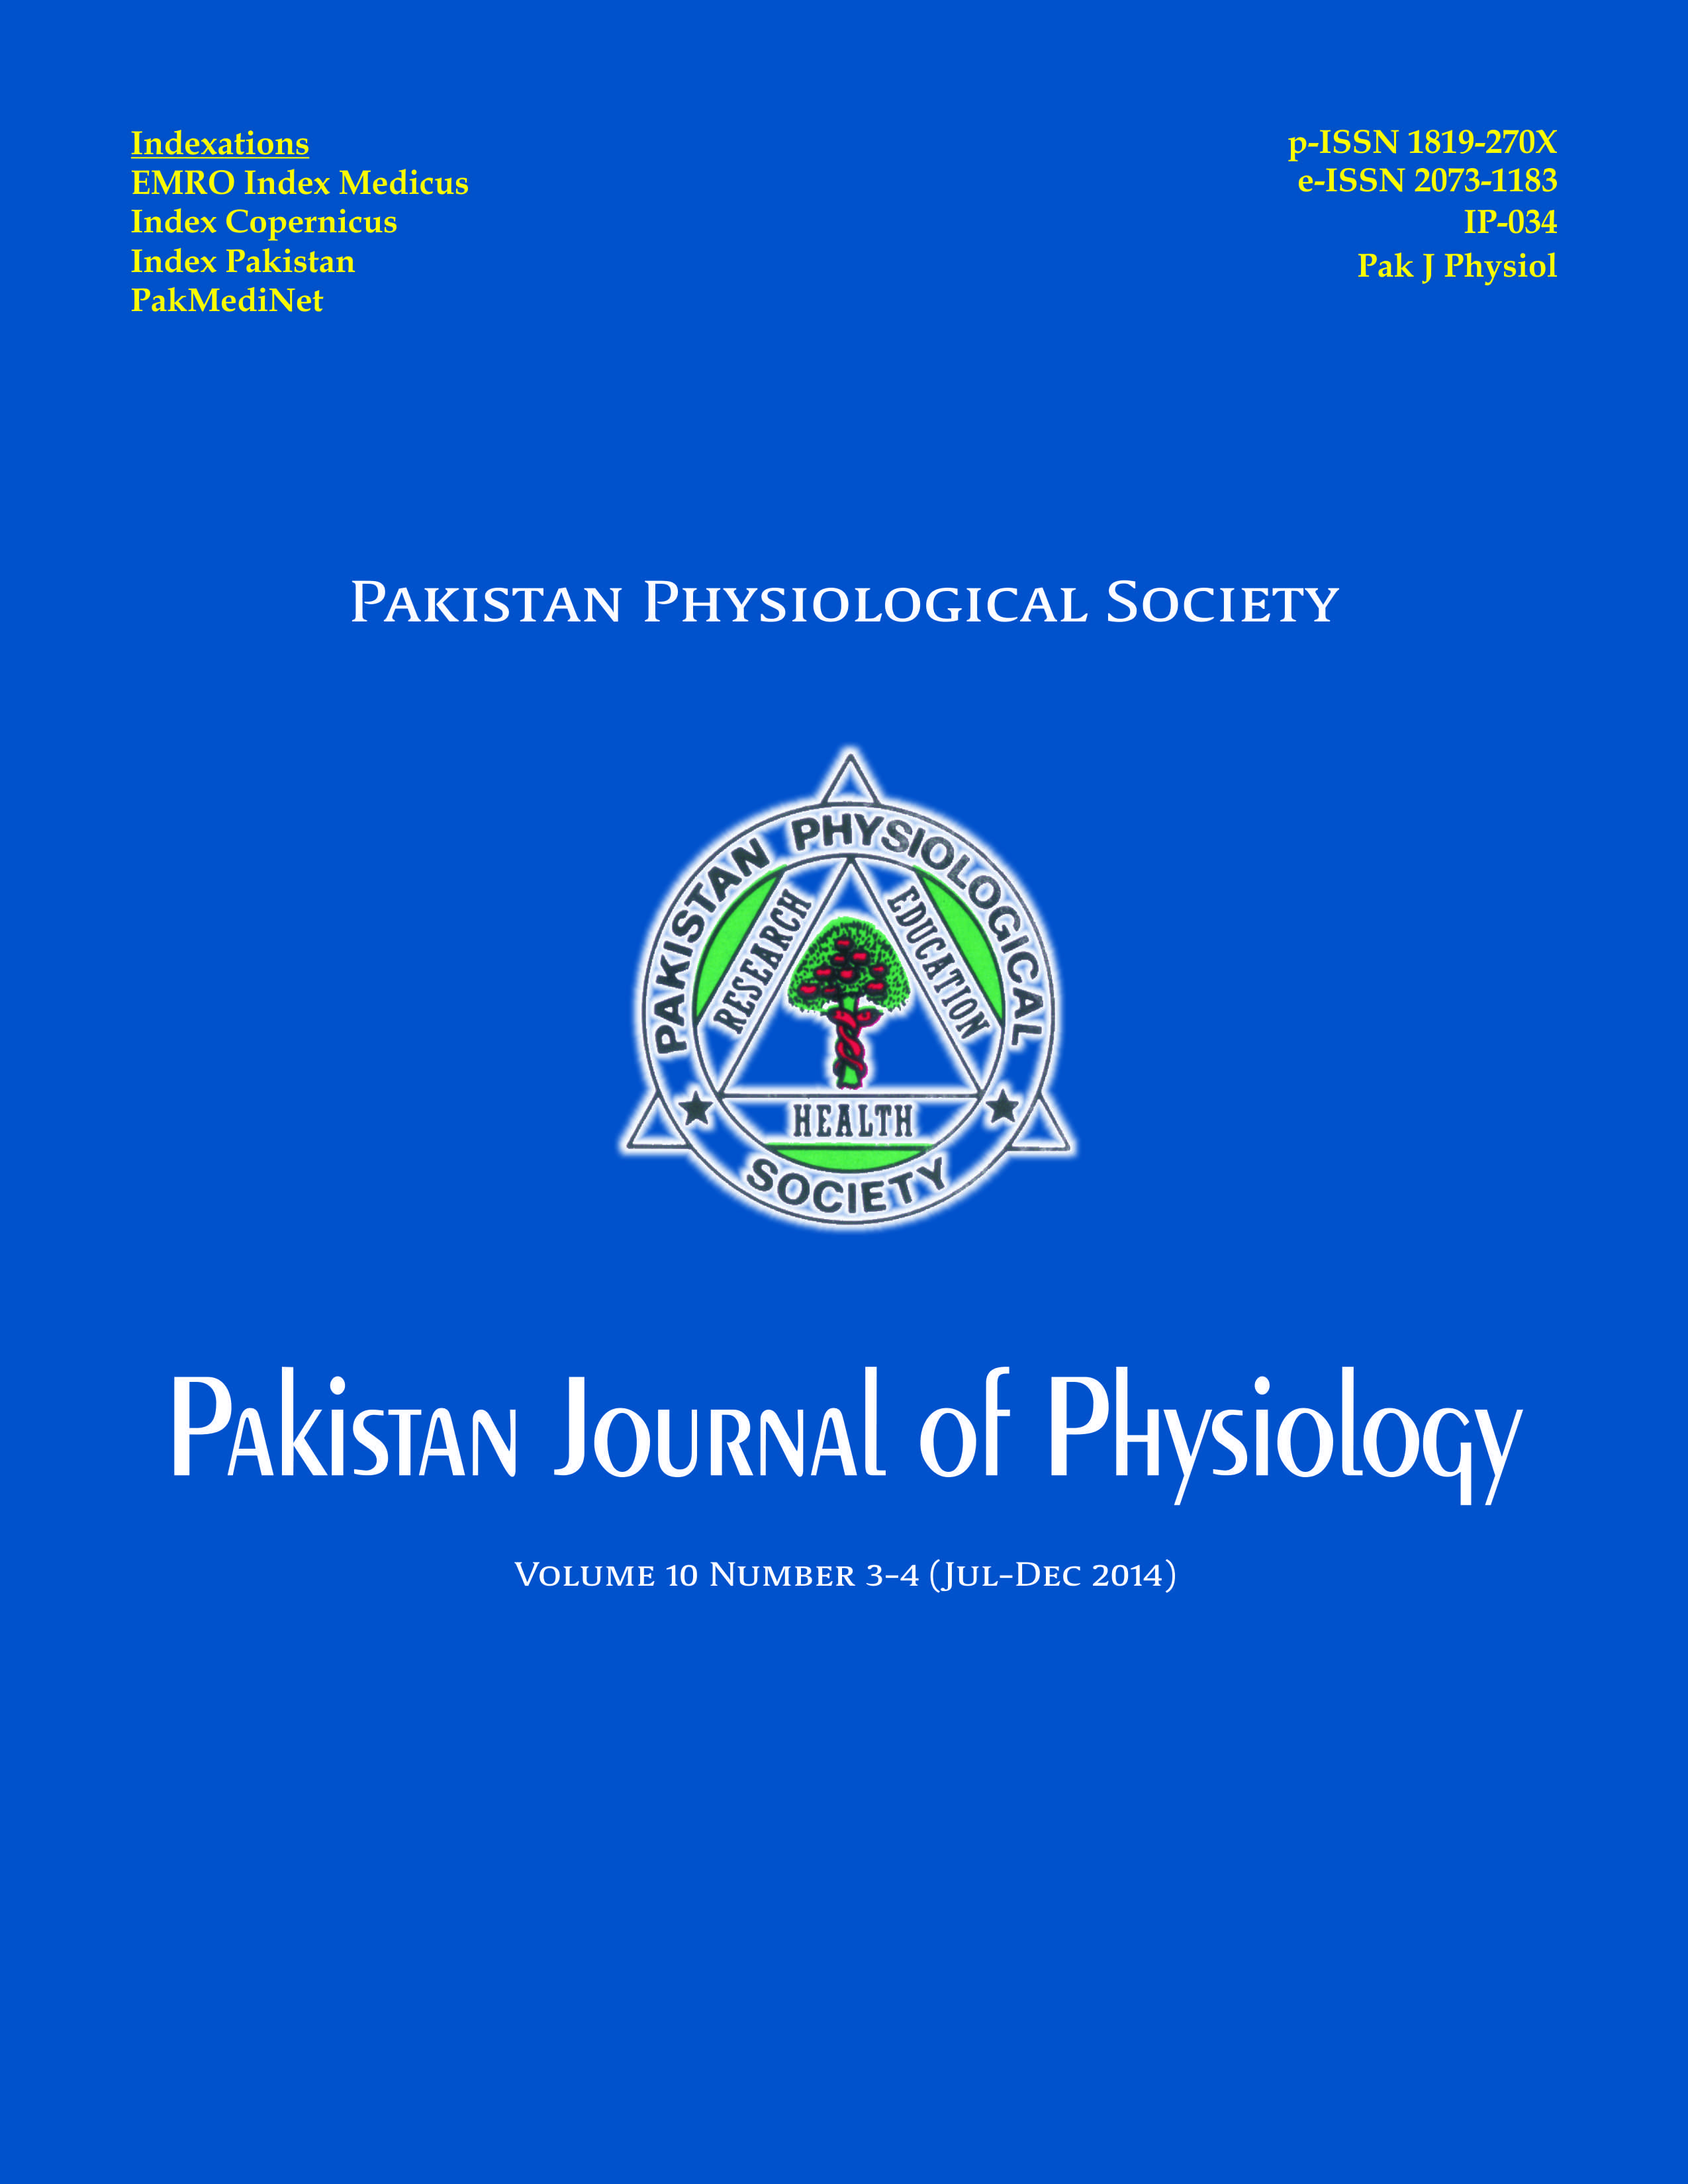 					View Vol. 10 No. 3-4 (2014): Pakistan Journal of Physiology
				